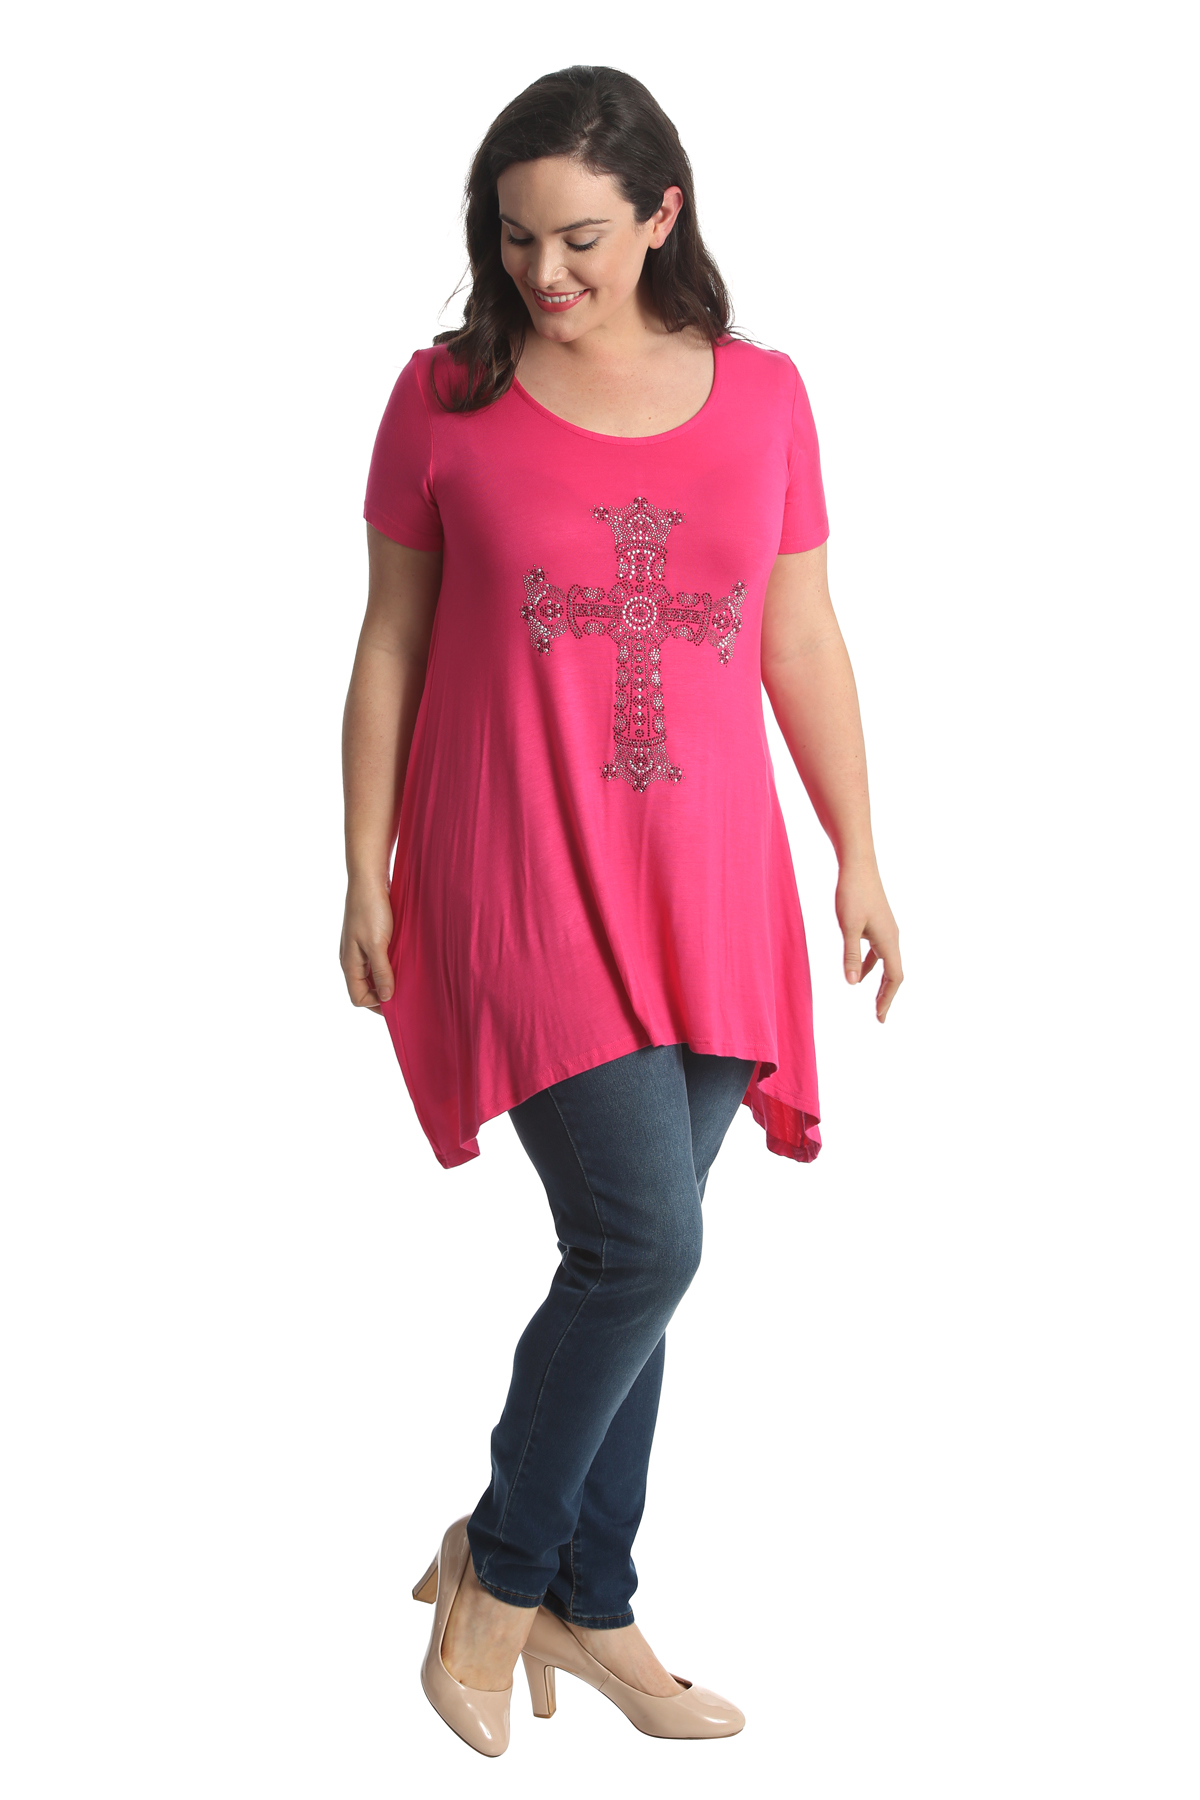 women plus size tops with cross necklace